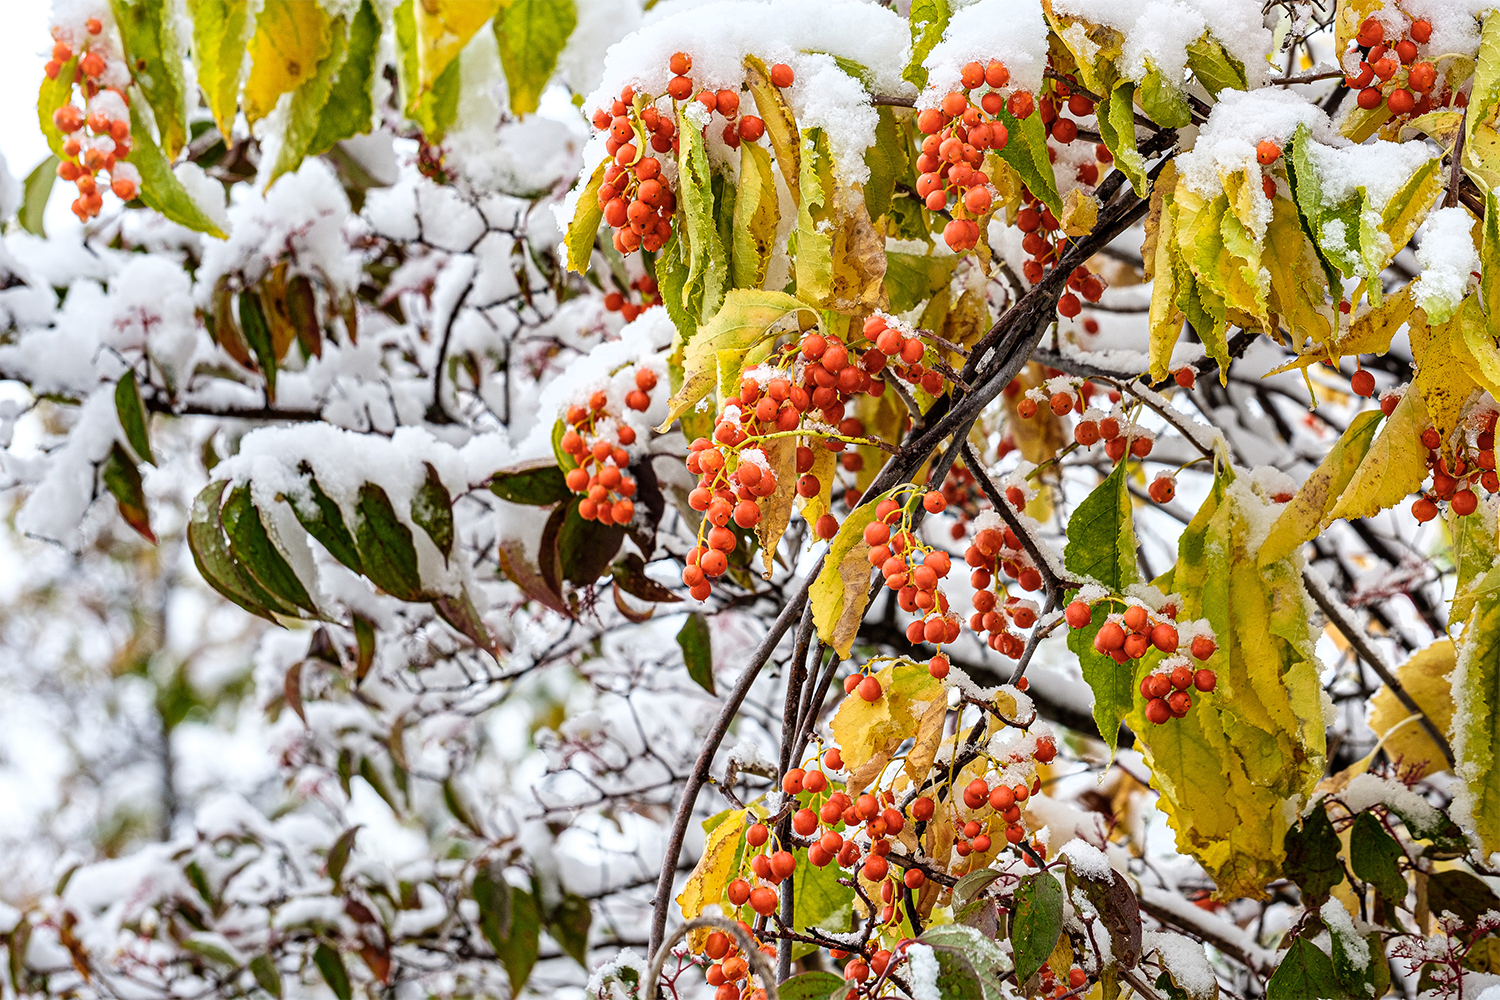 Snow on leaves and berries